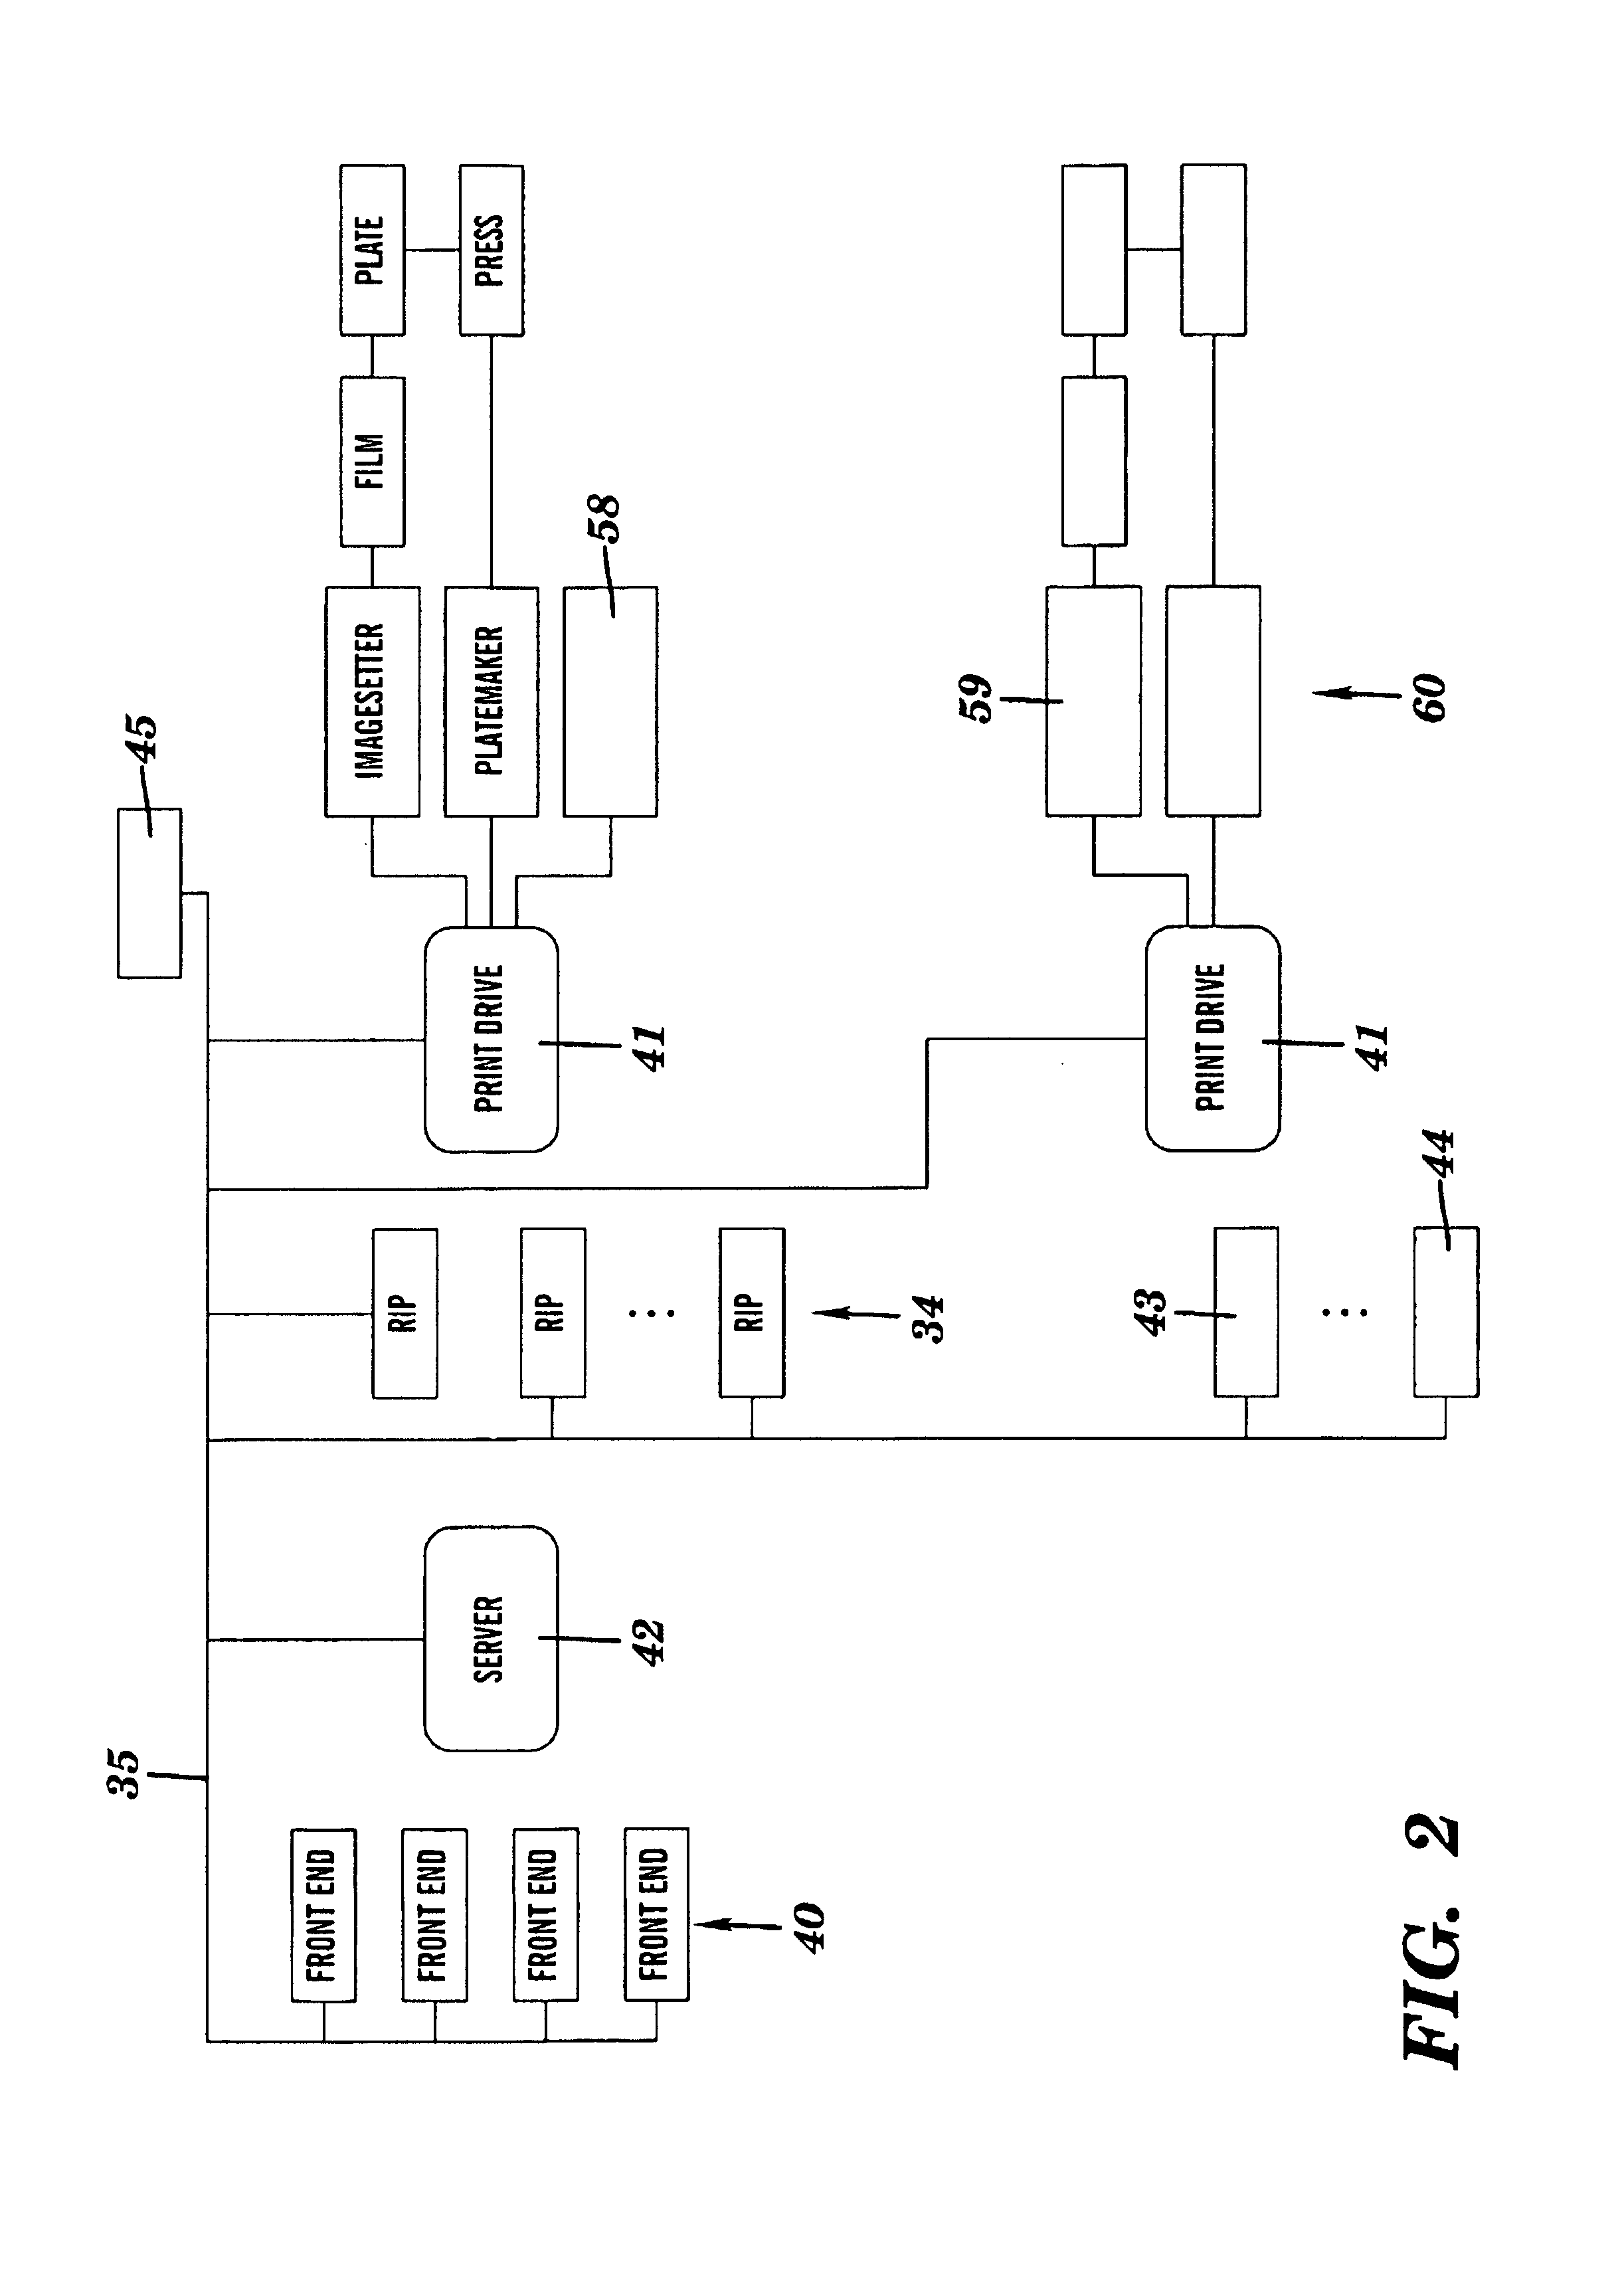 Print driver system having a user interface and a method for processing raster data